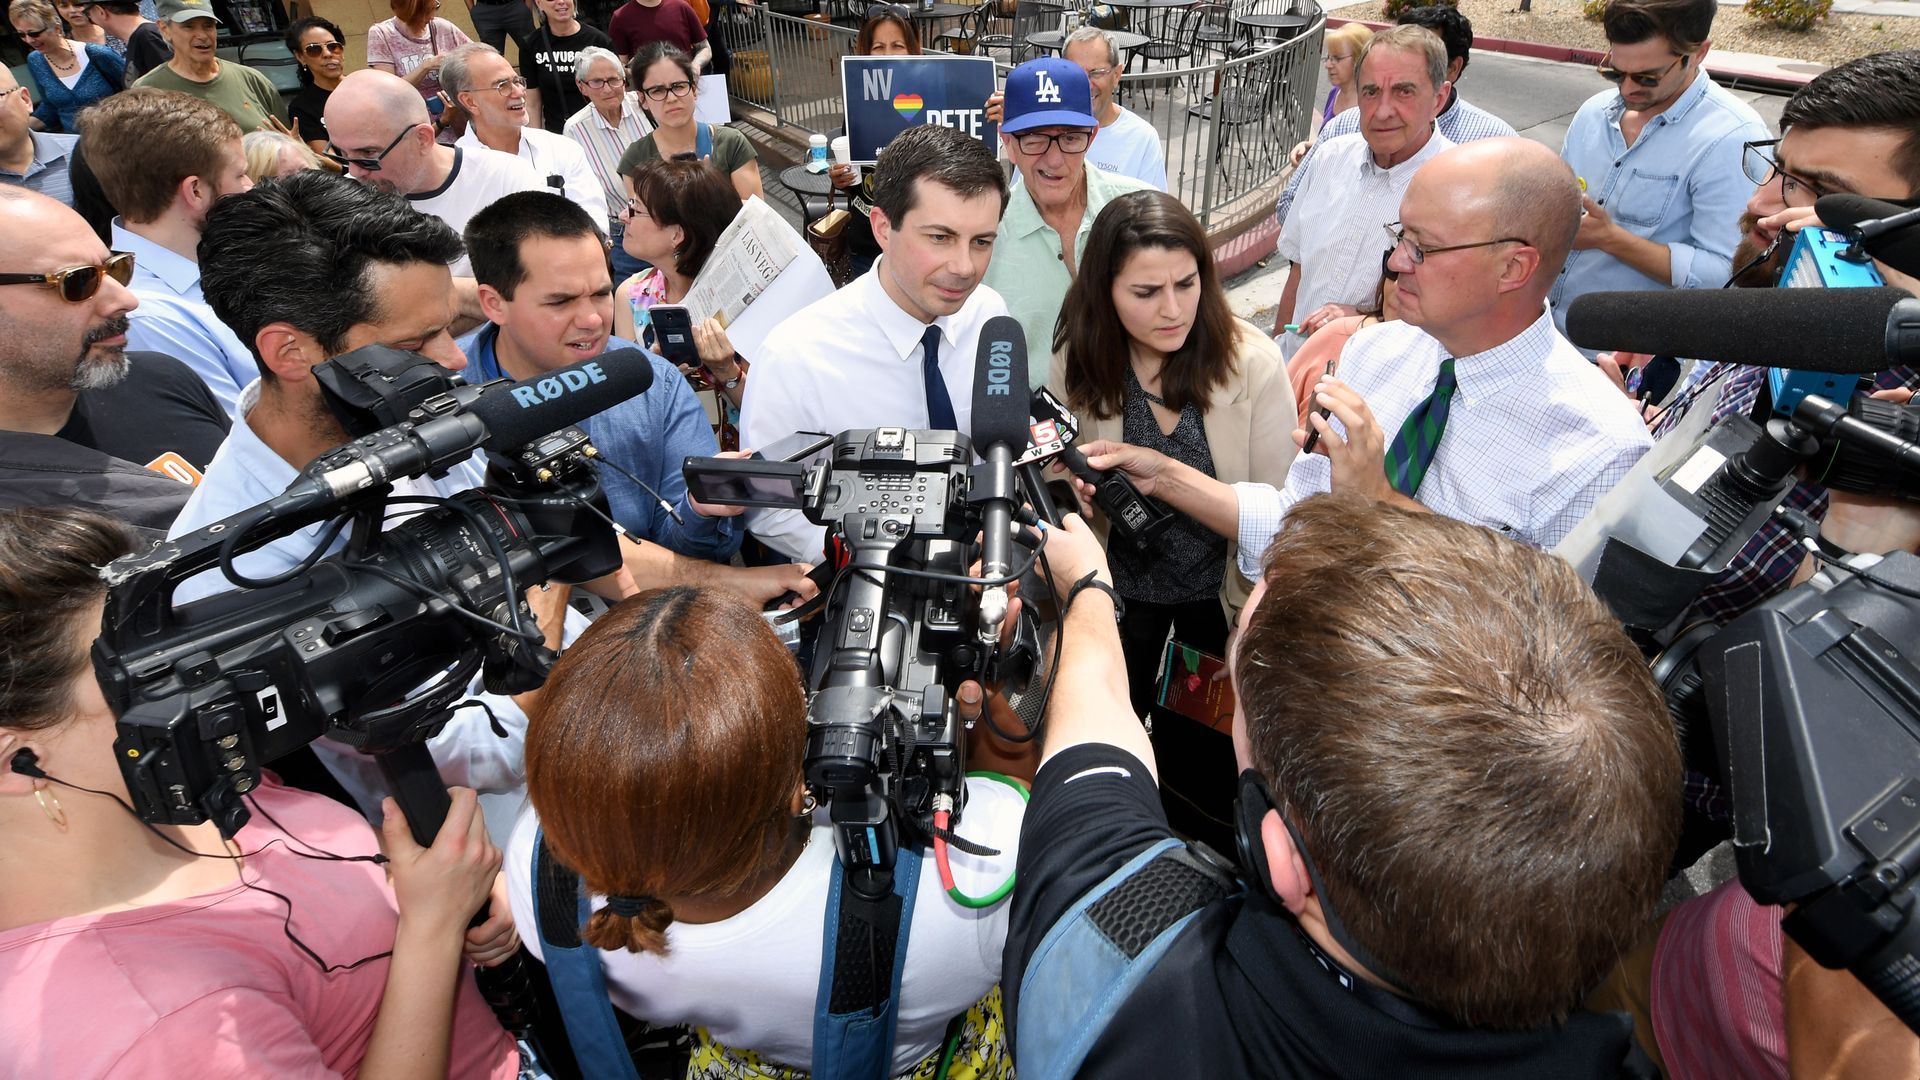 In this image, Pete Buttigieg stands in the center of a crowded ring of reporters who hold microphones towards him.